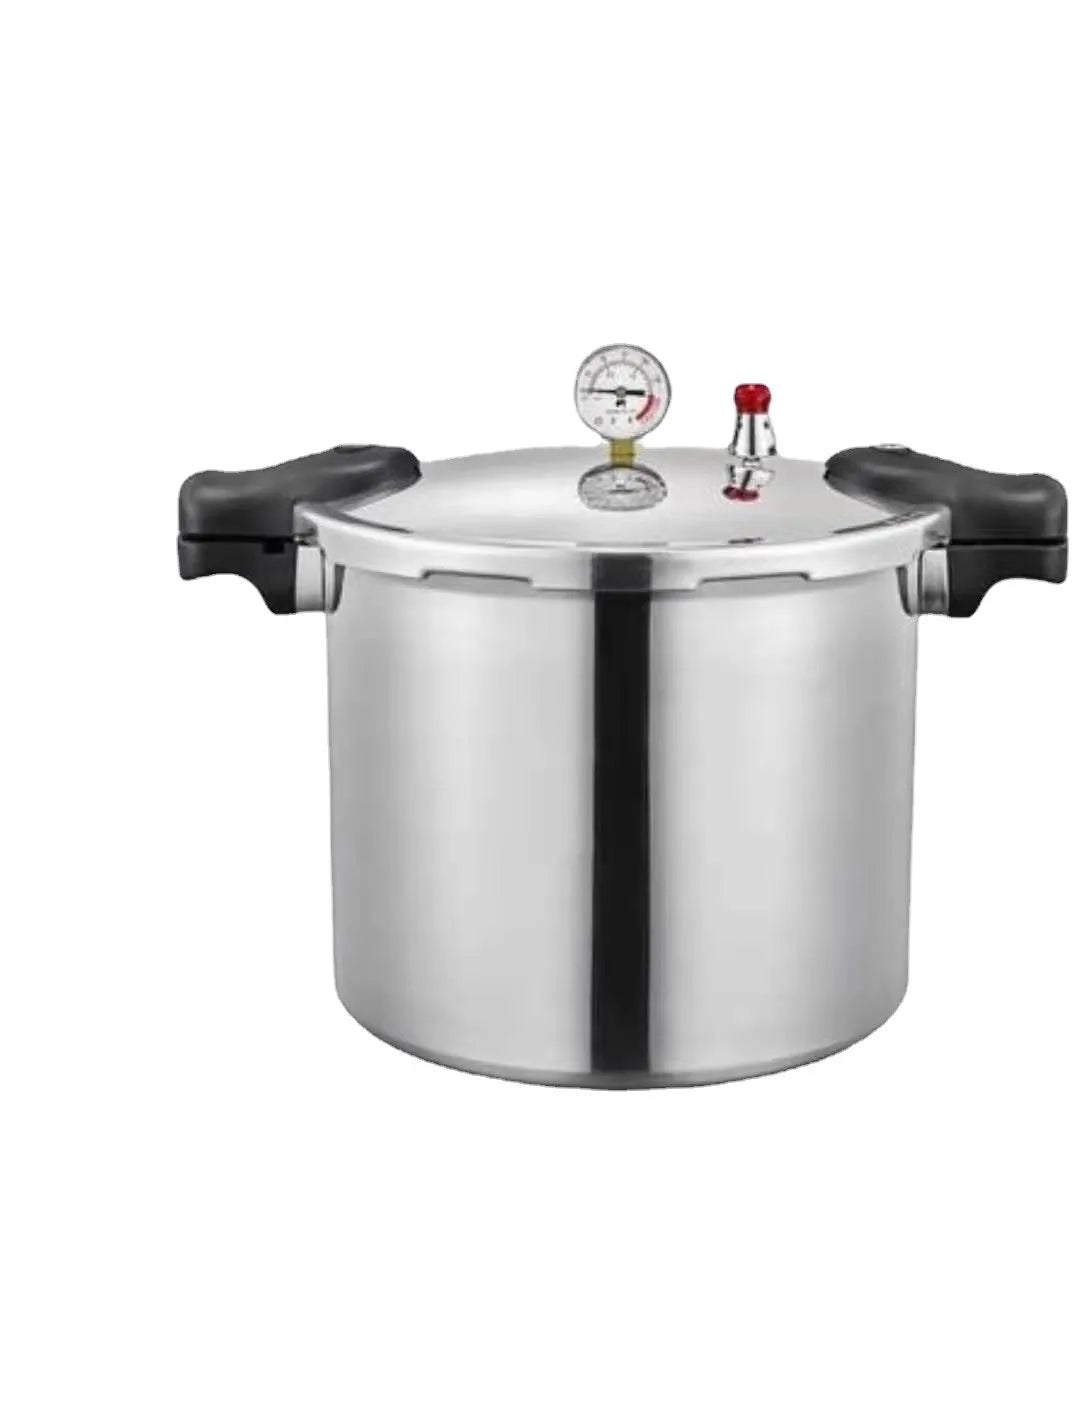 Pressure Cooker Commercial Large Capacity Gas Induction Cooker Universal Hotel Dining Hall Oversized Pressure Cooker